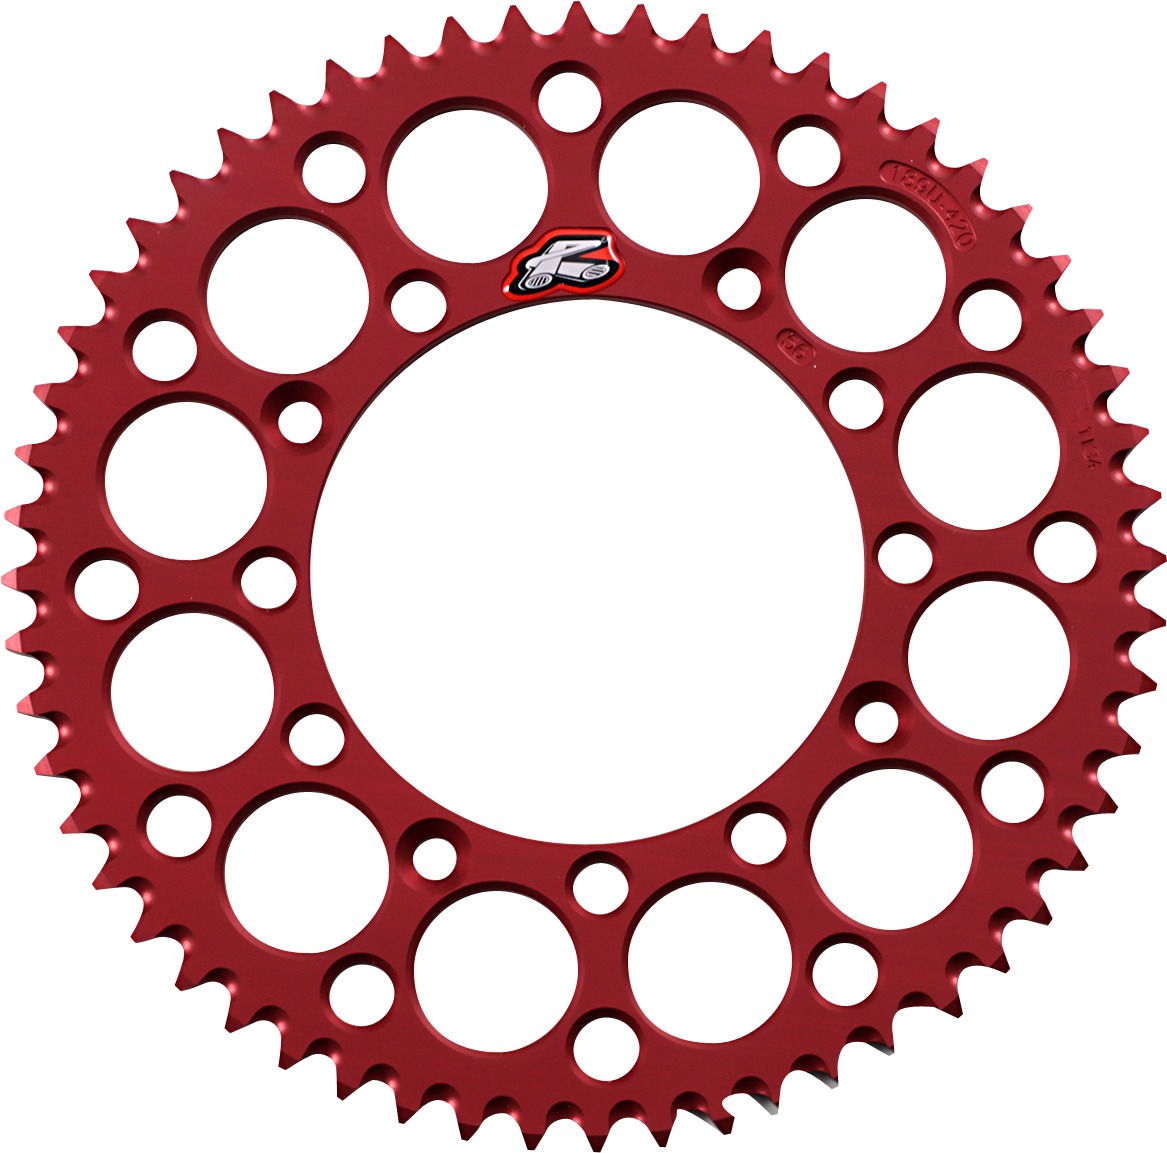 03-07 Honda CR 85RB/ 07-09/12-14 CRF 150RB Rear Sprocket Grooved - Red 420-56 Teeth - Click Image to Close